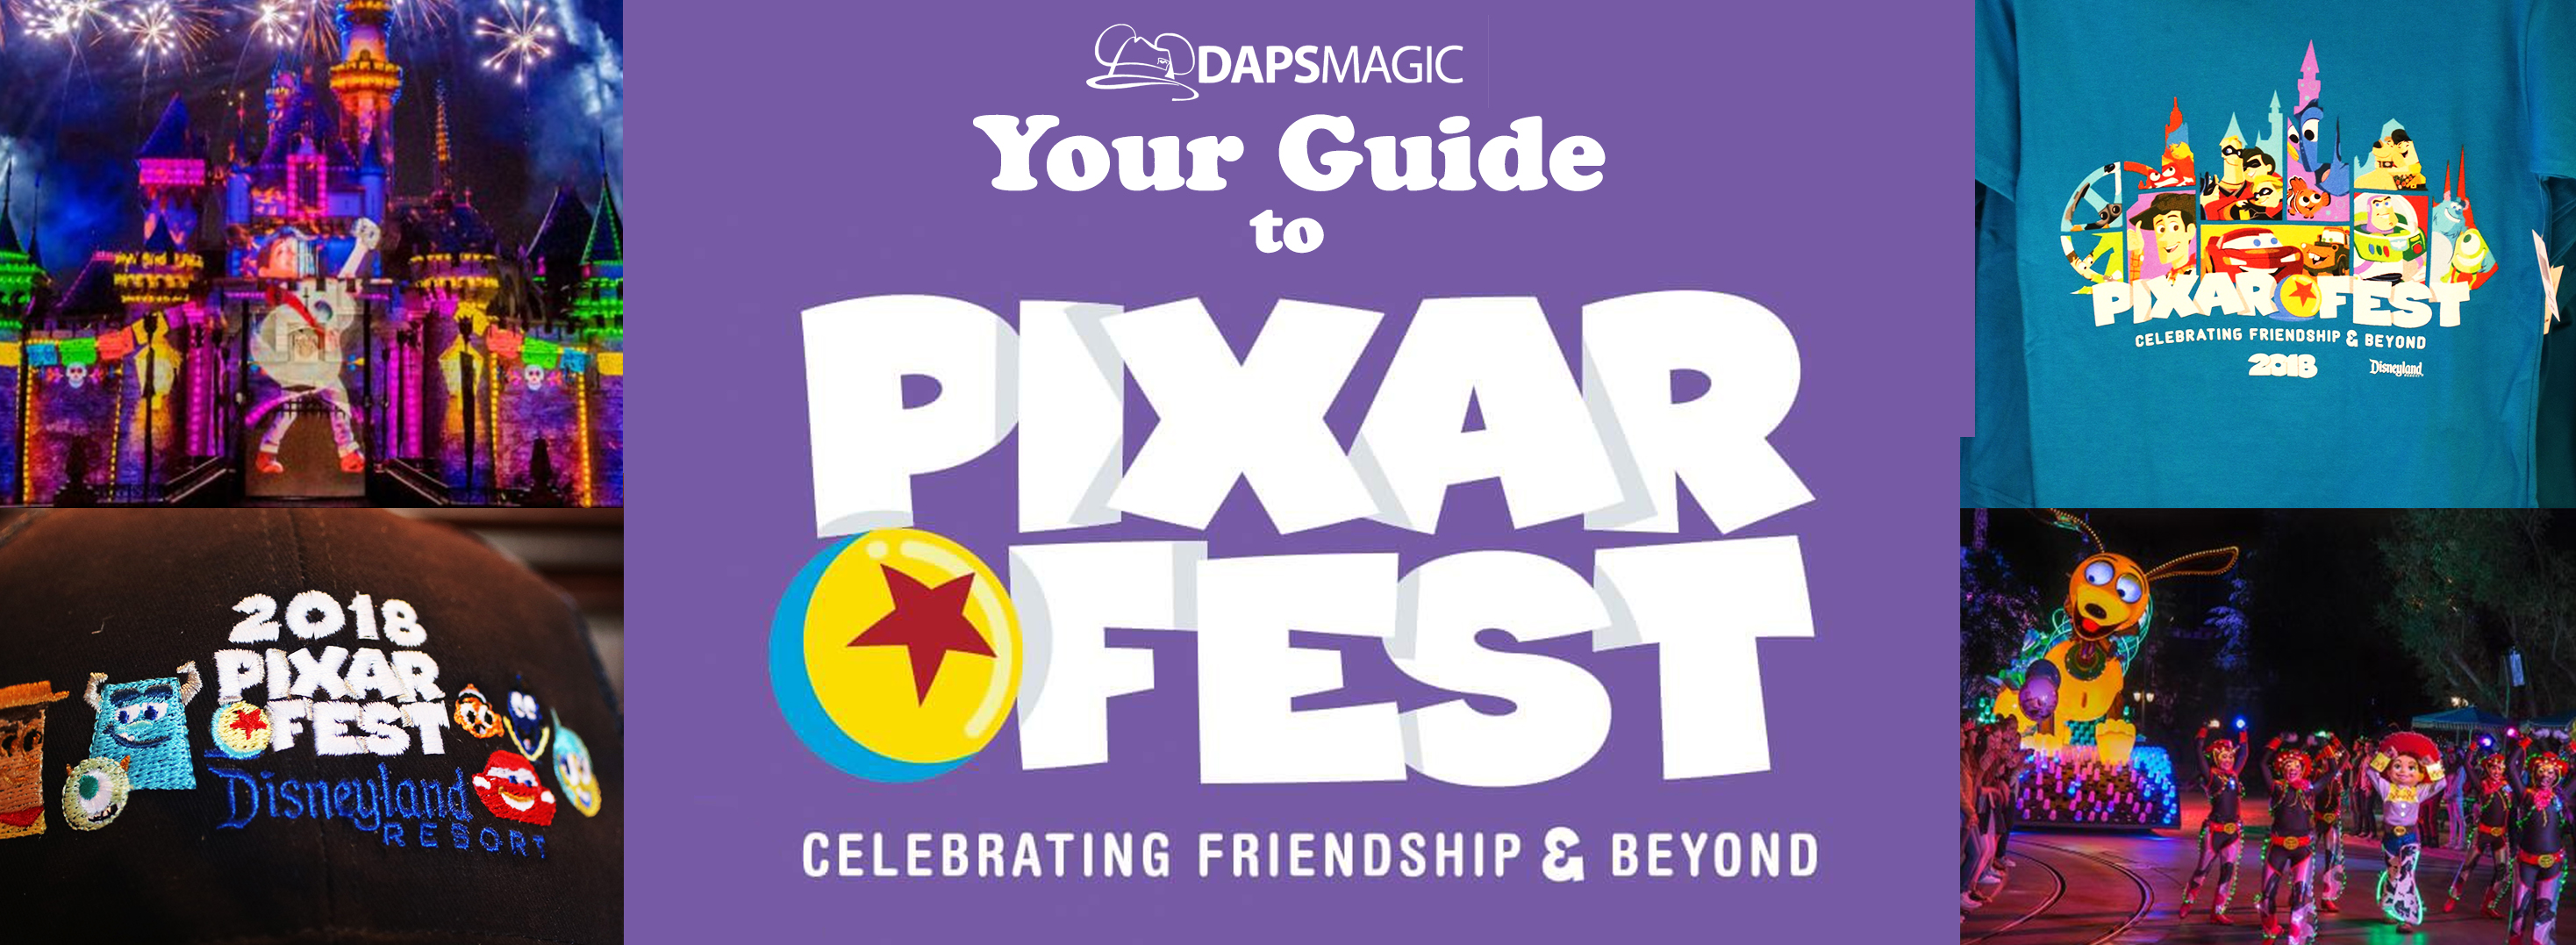 Your Guide To Pixar Fest at the Disneyland Resort